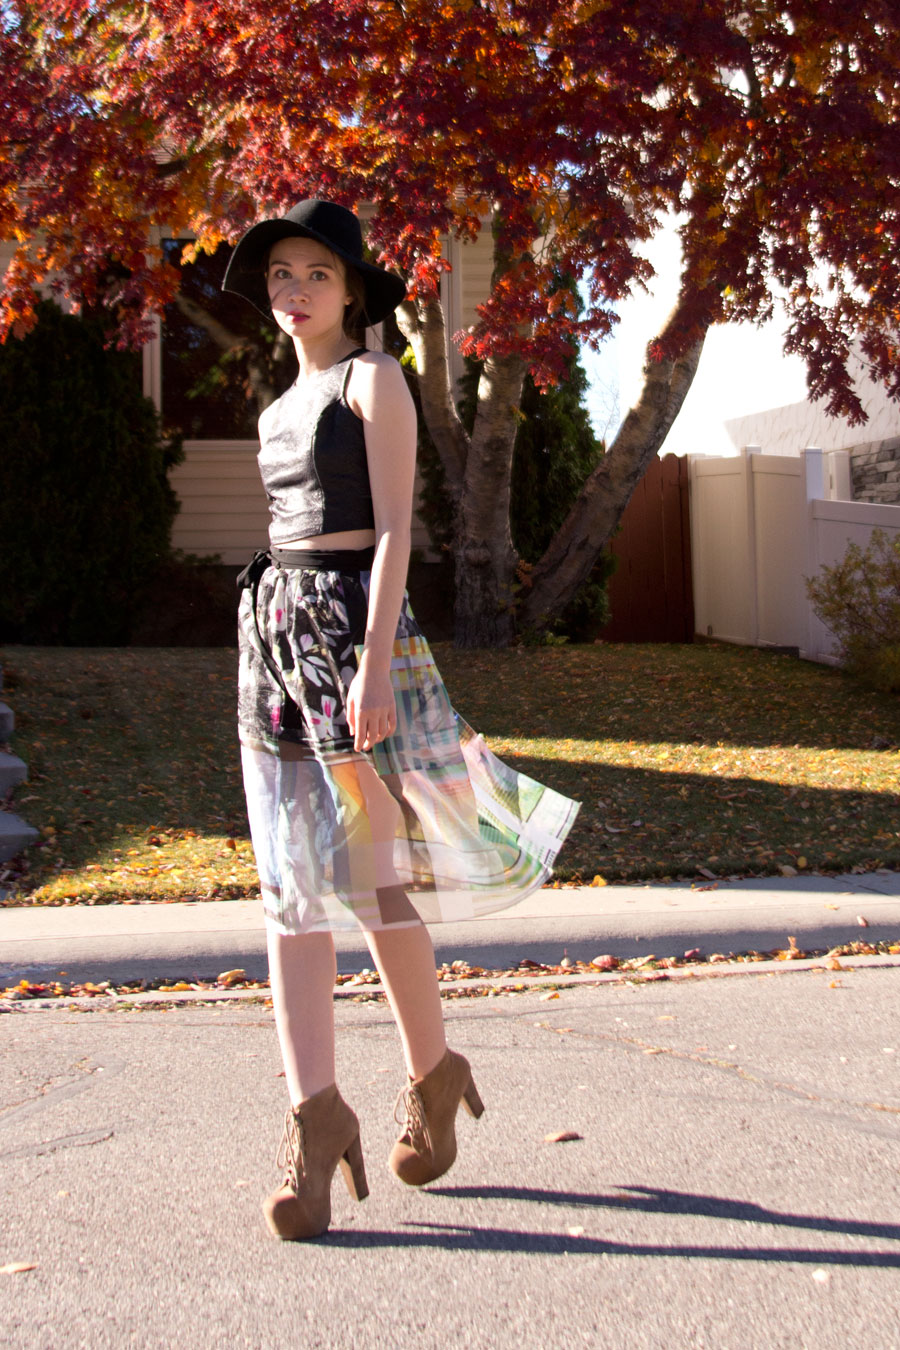 fall fashion, clover canyon, sheer skirt, crop top, felt hat, litas, jeffrey campbell, calgary fashion, anthropologie, bohemian, fashion, style, outfit of the day, personal style